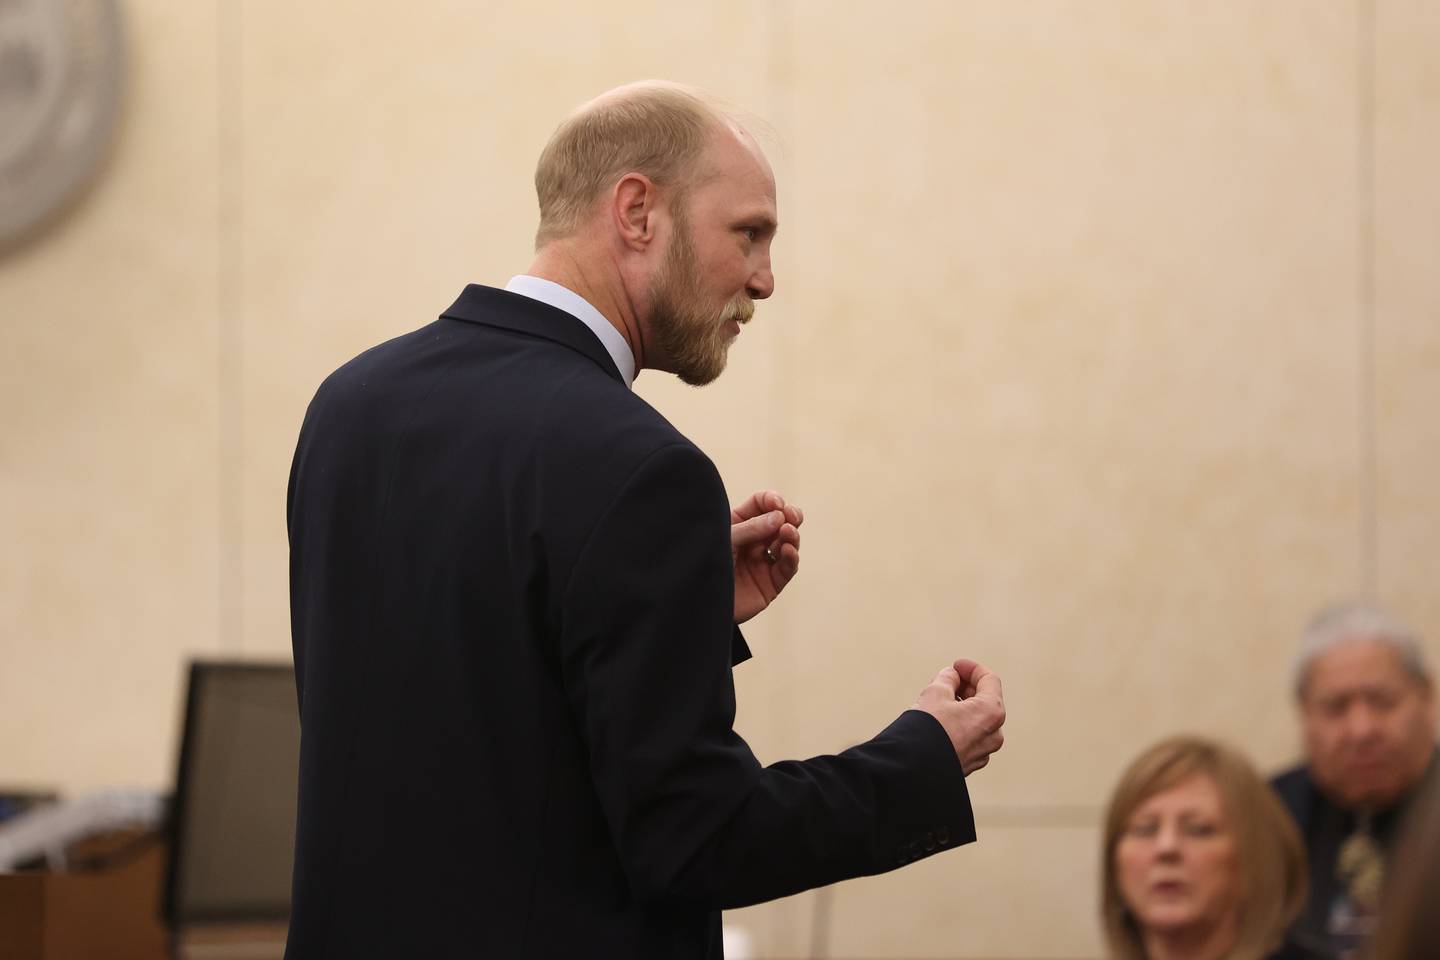 Prosecutor Adam Capelli makes closing arguments on Monday in the case against Sean Woulfe at the Will County Courthouse. Sean Woulfe, 29, is charge with reckless homicide of Lindsey Schmidt, 29, and her three sons, Owen, 6, Weston, 4, and Kaleb, 1. Monday, Mar. 28, 2022, in Joliet.